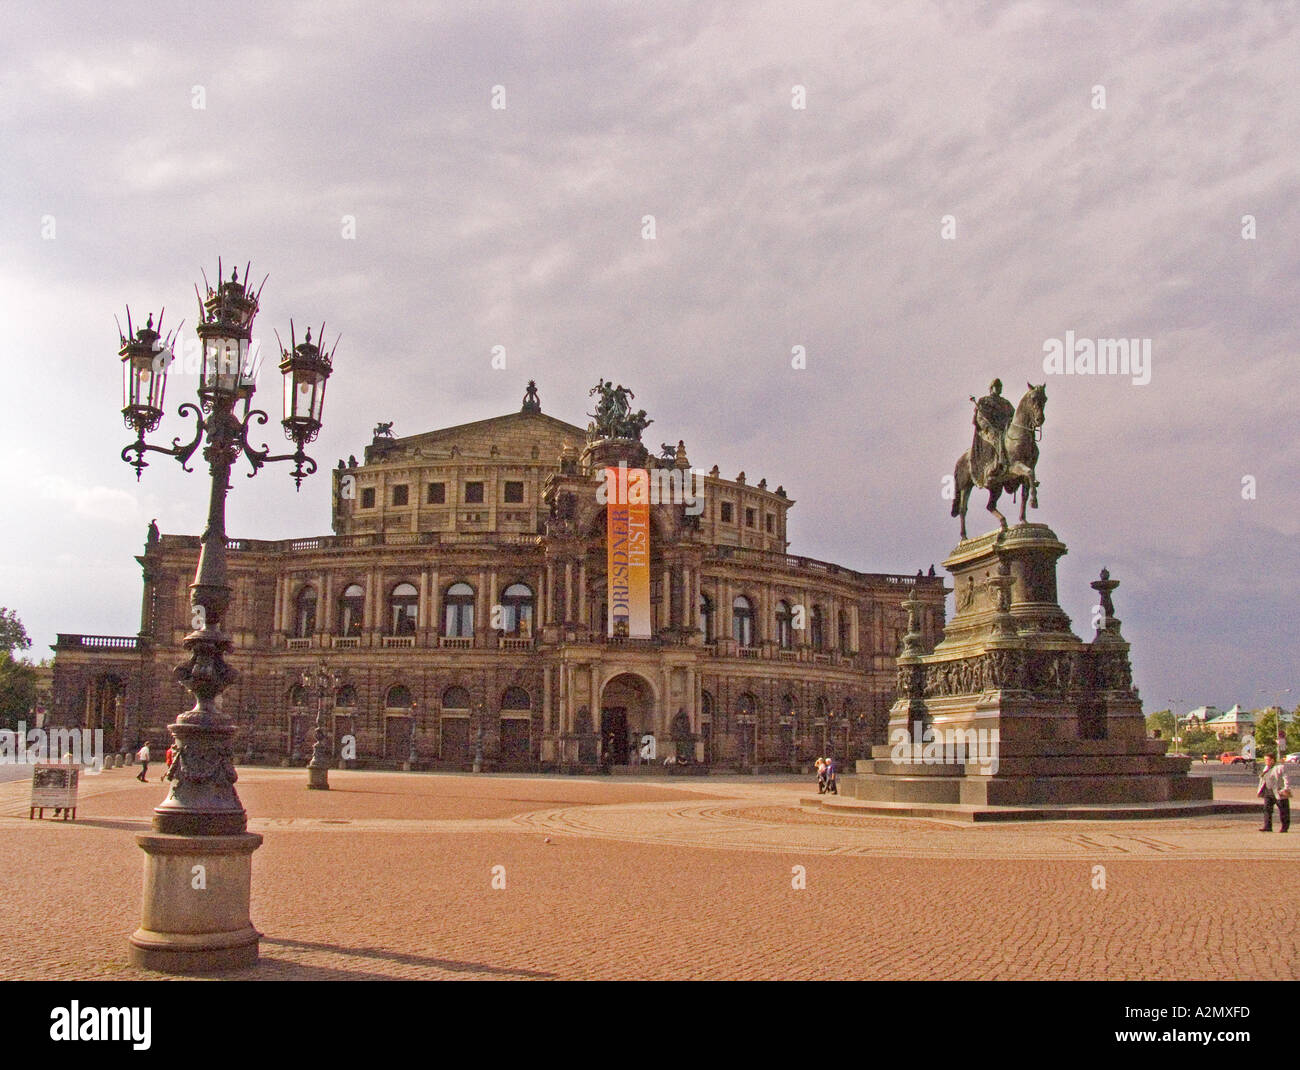 BRD Germany Sachsen Dresden Capitol at the River Elbe the Elb Florenc at the Theater Square the Semper Opera and the Horseman Stock Photo